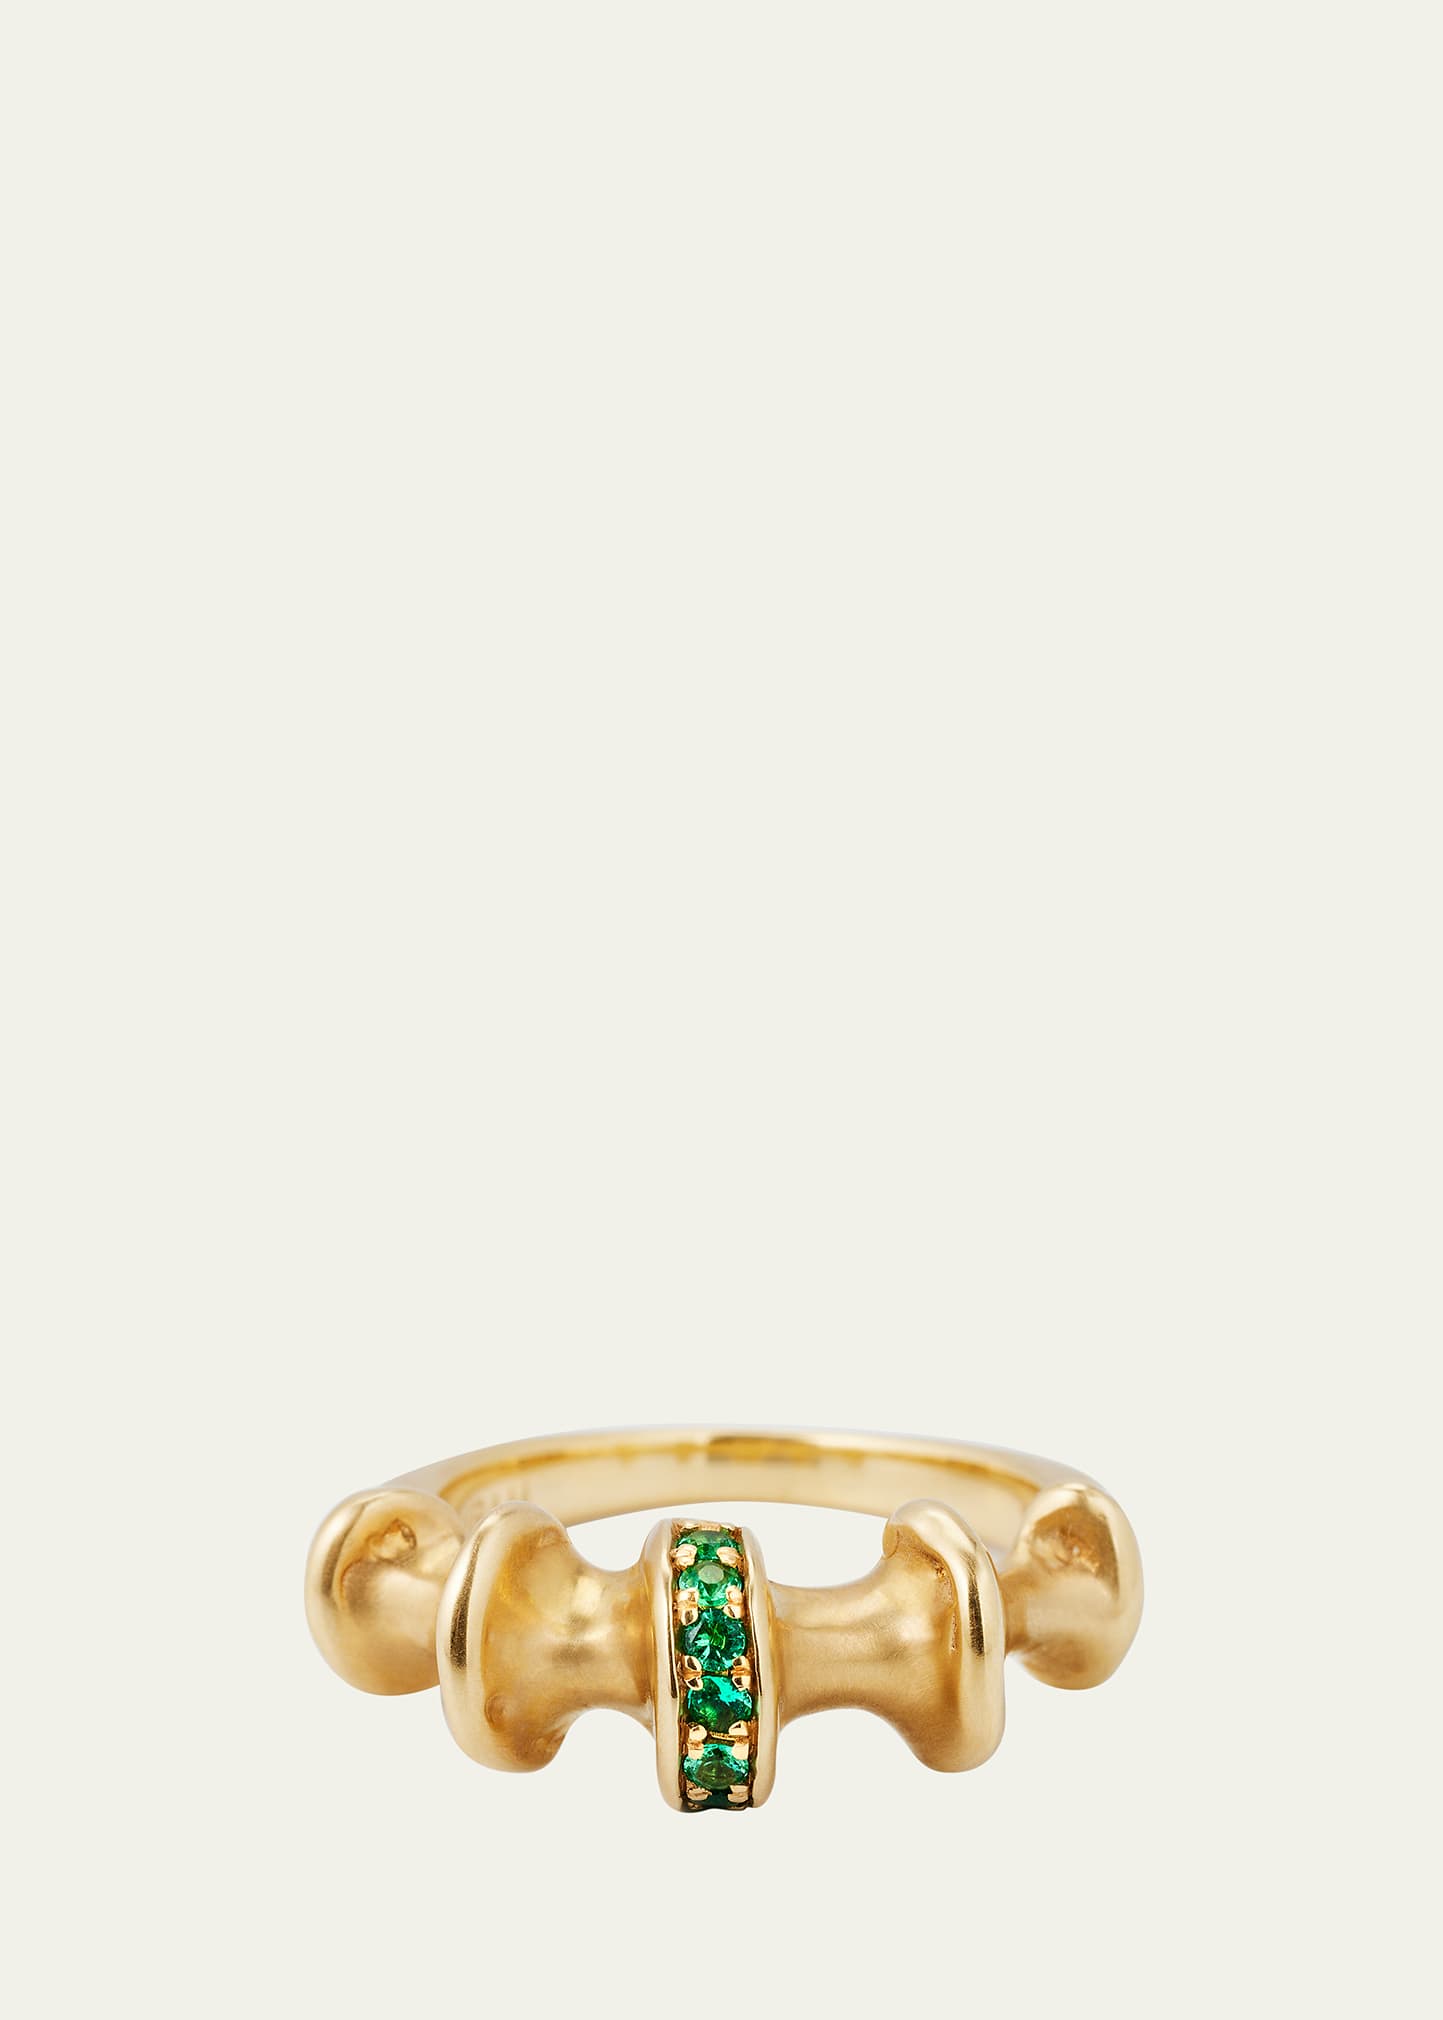 Yellow Gold Chrona Band Ring with Emeralds, Size 6.5